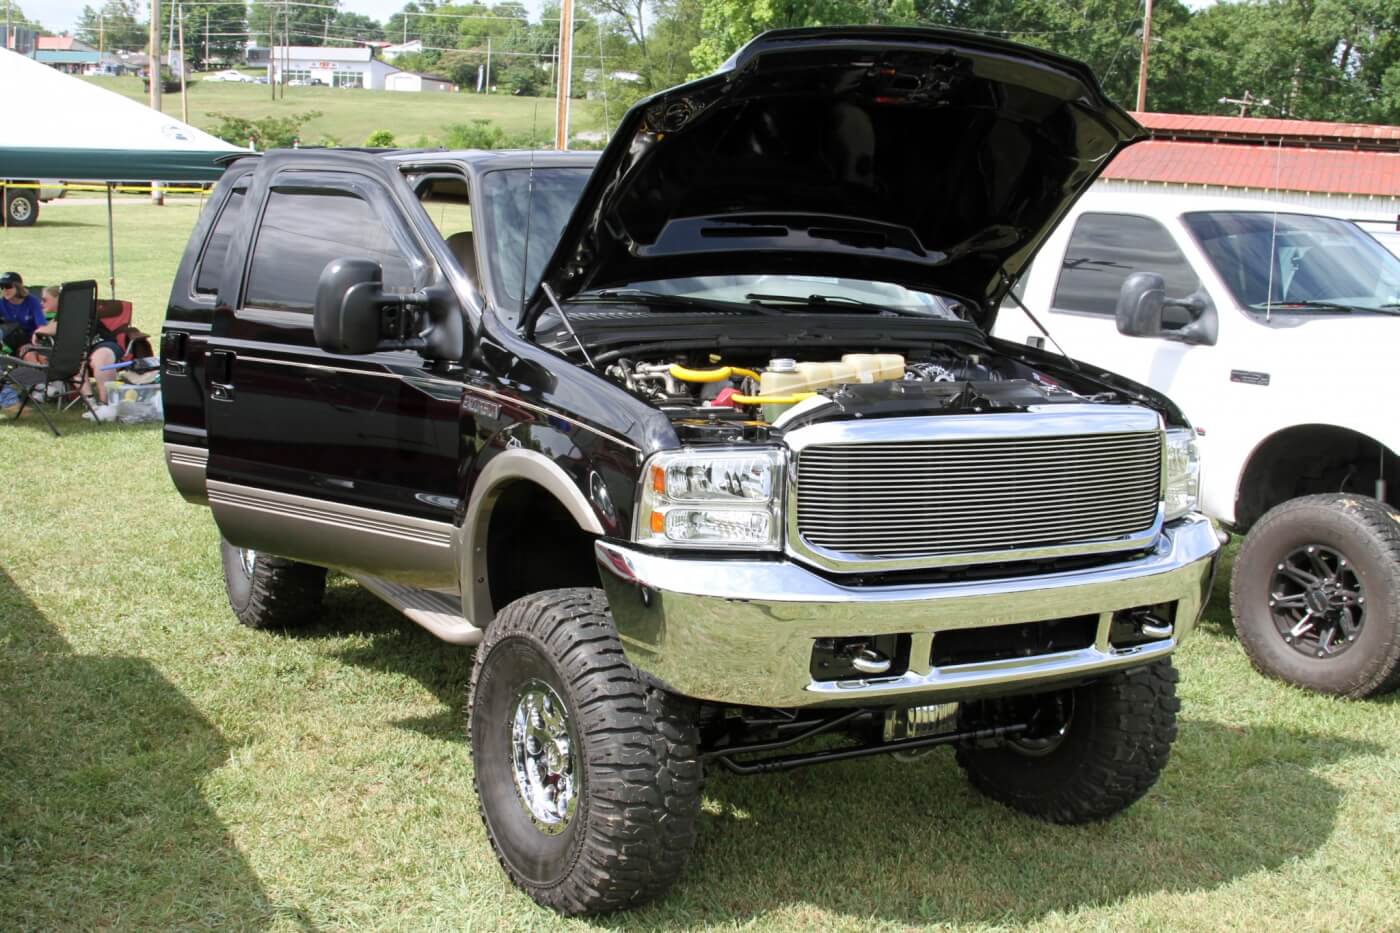 Eric Schlitzer’s lifted Ford Excursion won the award for Best Modified thanks to its clean lift and detailed engine bay.